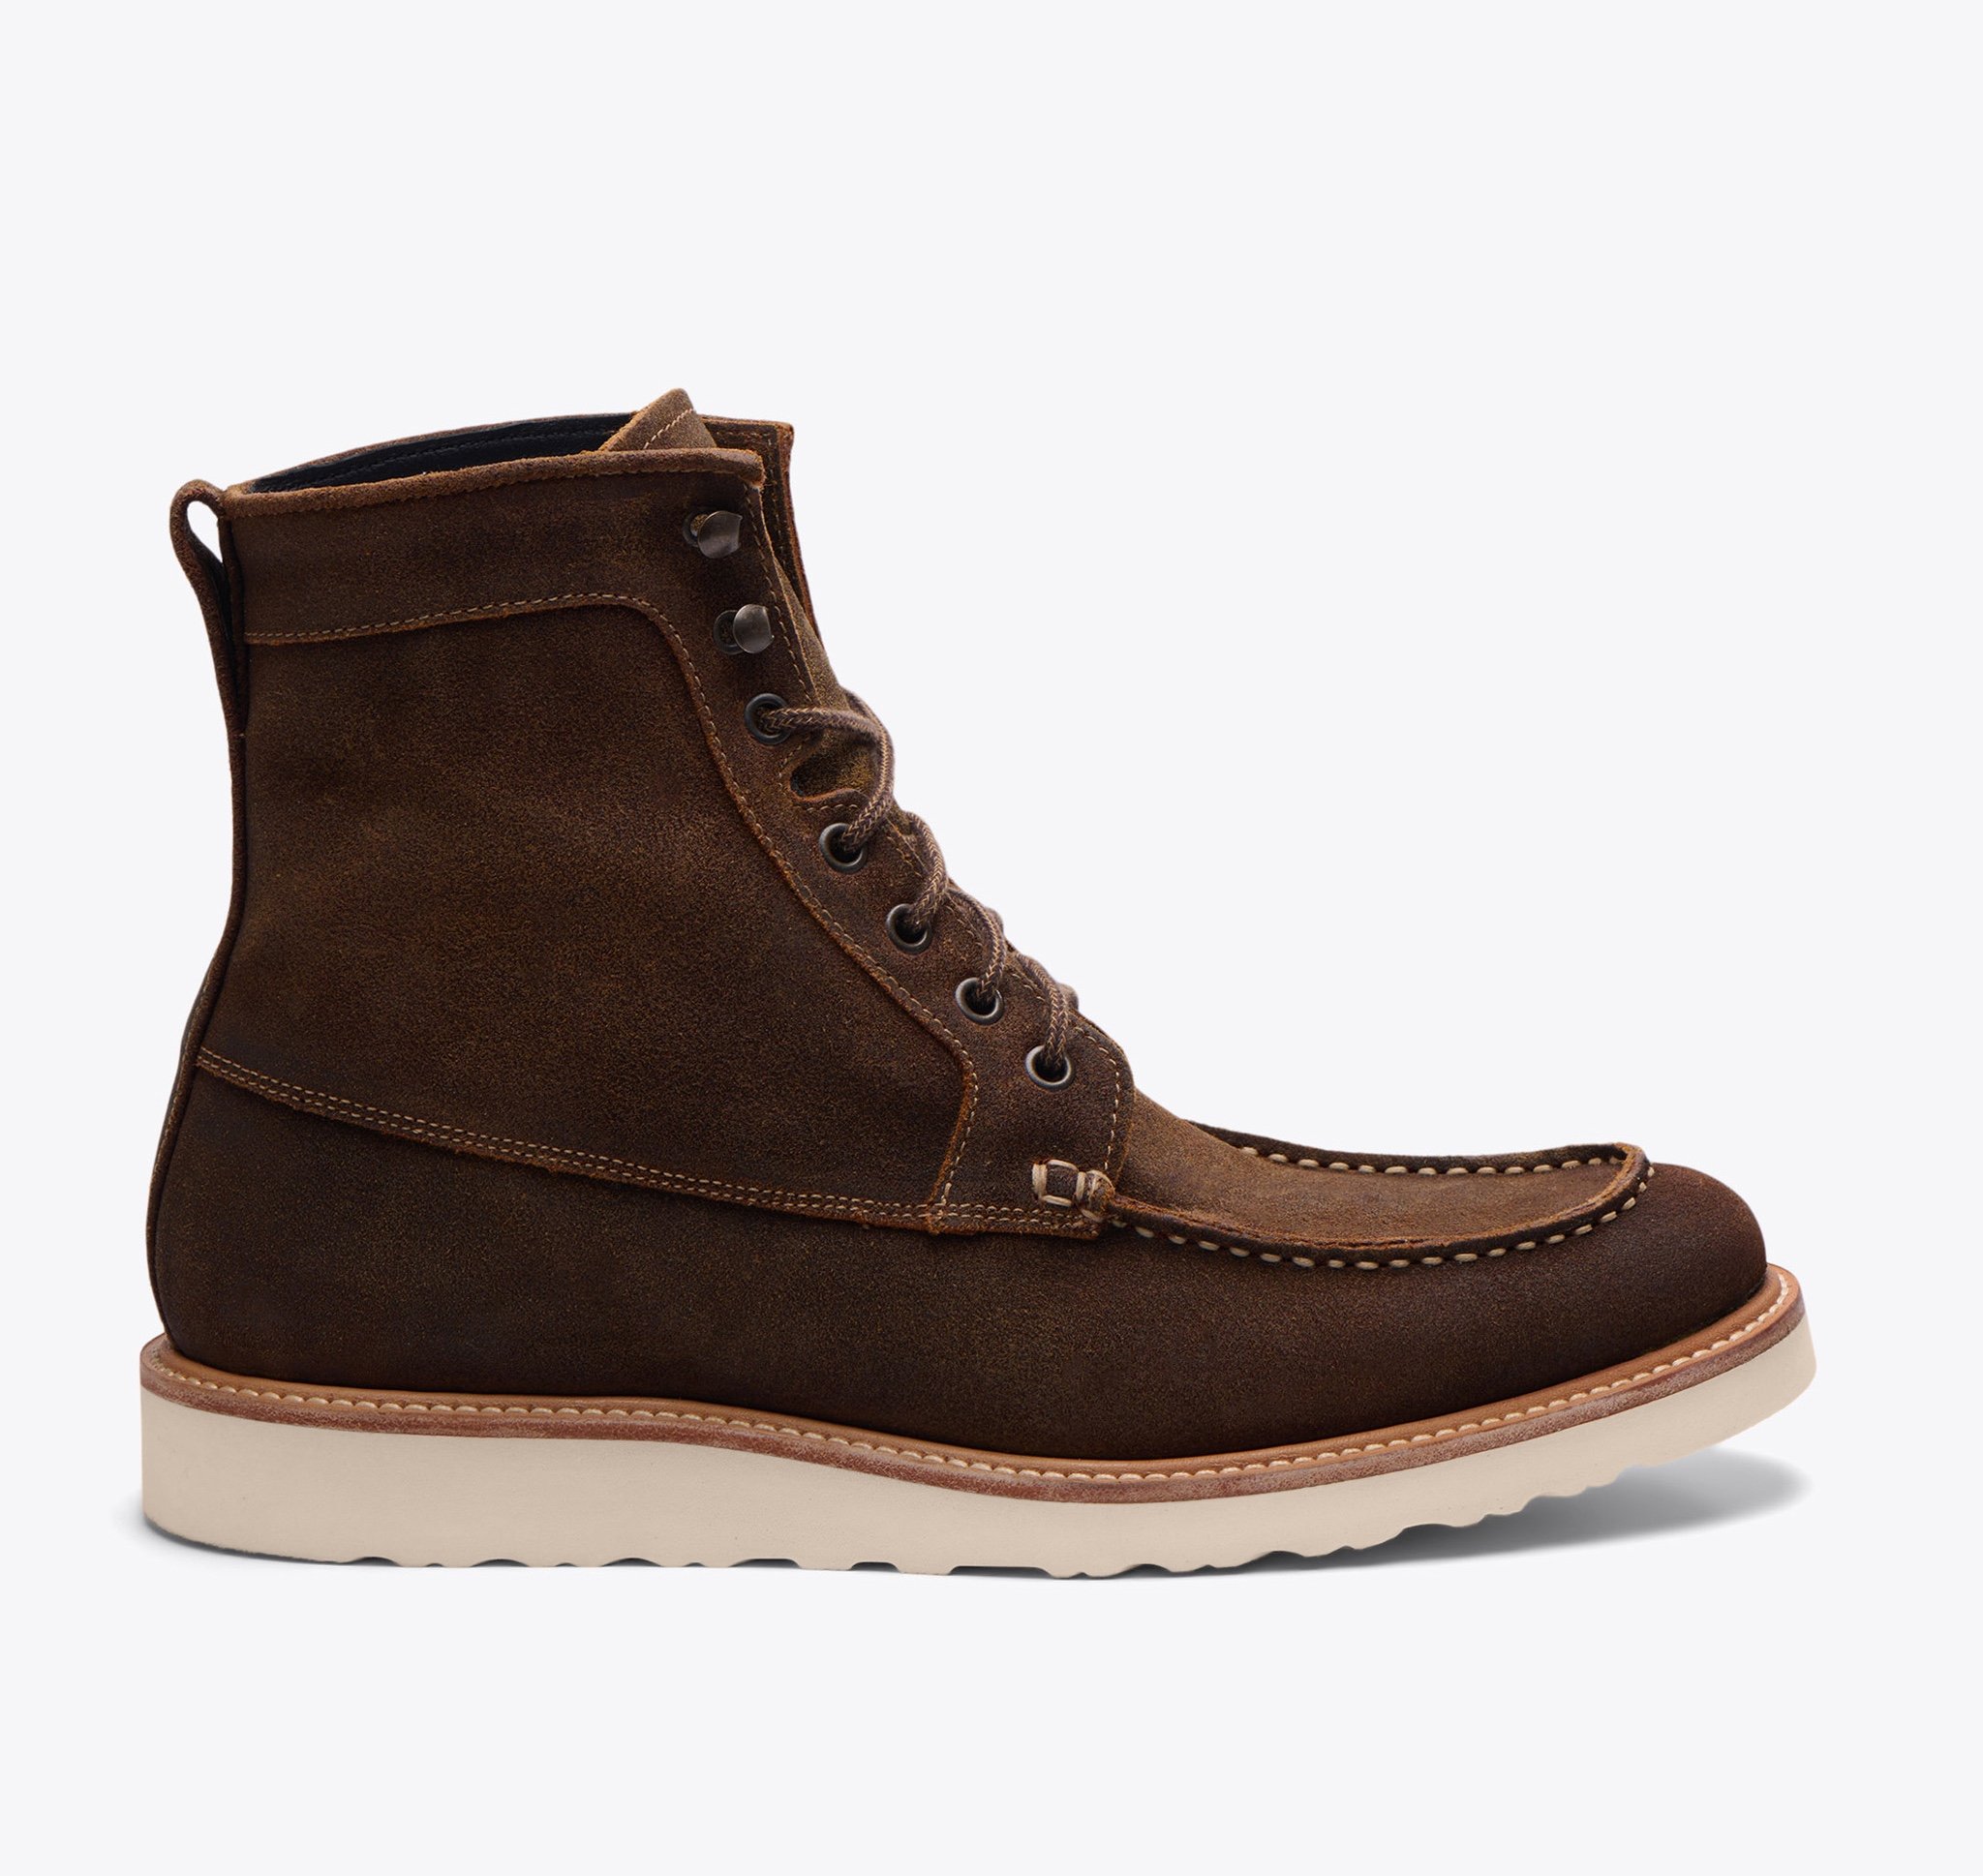 Nisolo All-Weather Mateo Boot Waxed Brown